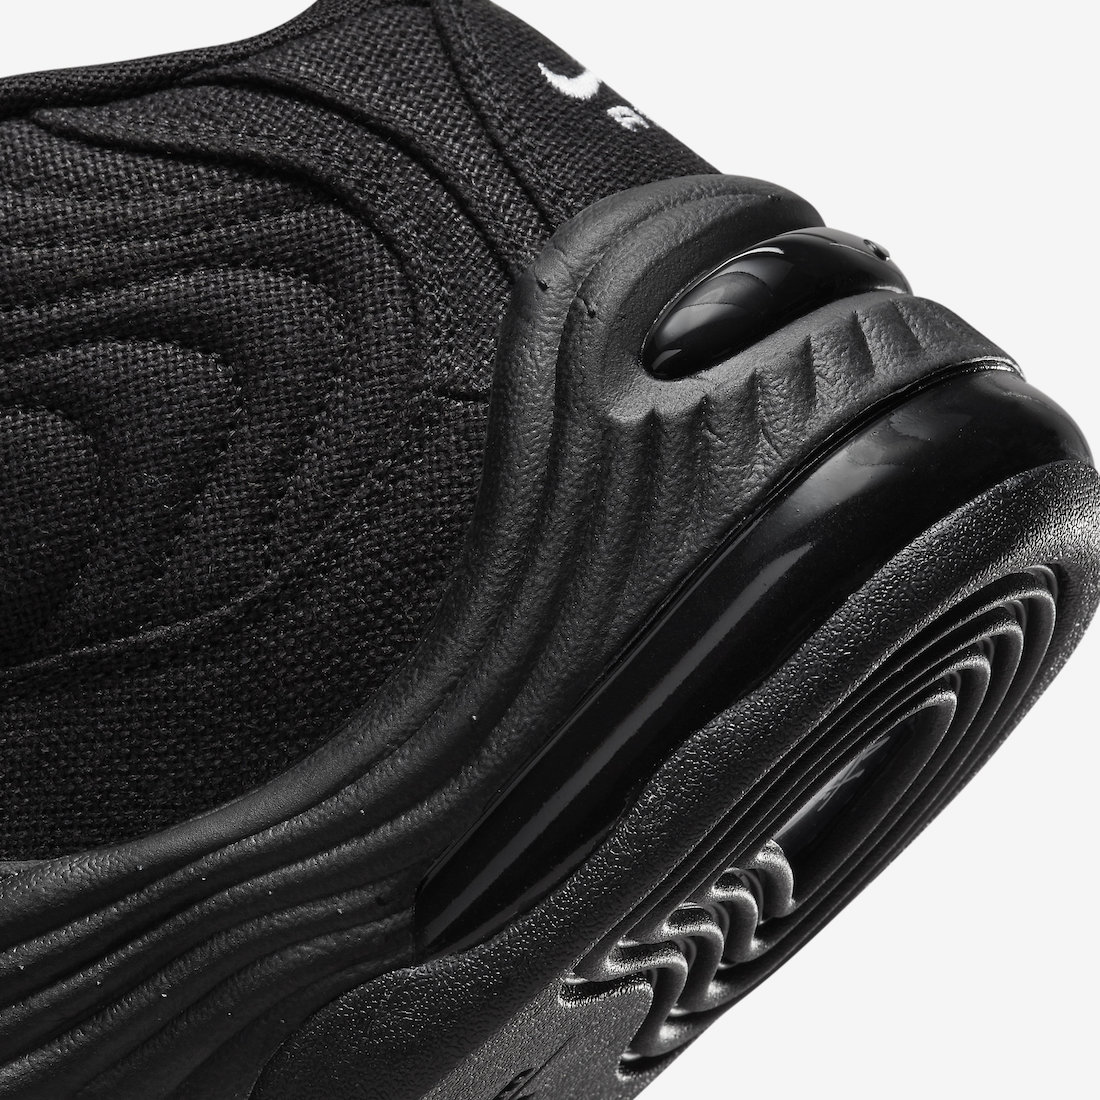 Stussy Nike Air Penny 2 Black DQ5674 001 Release Date 7